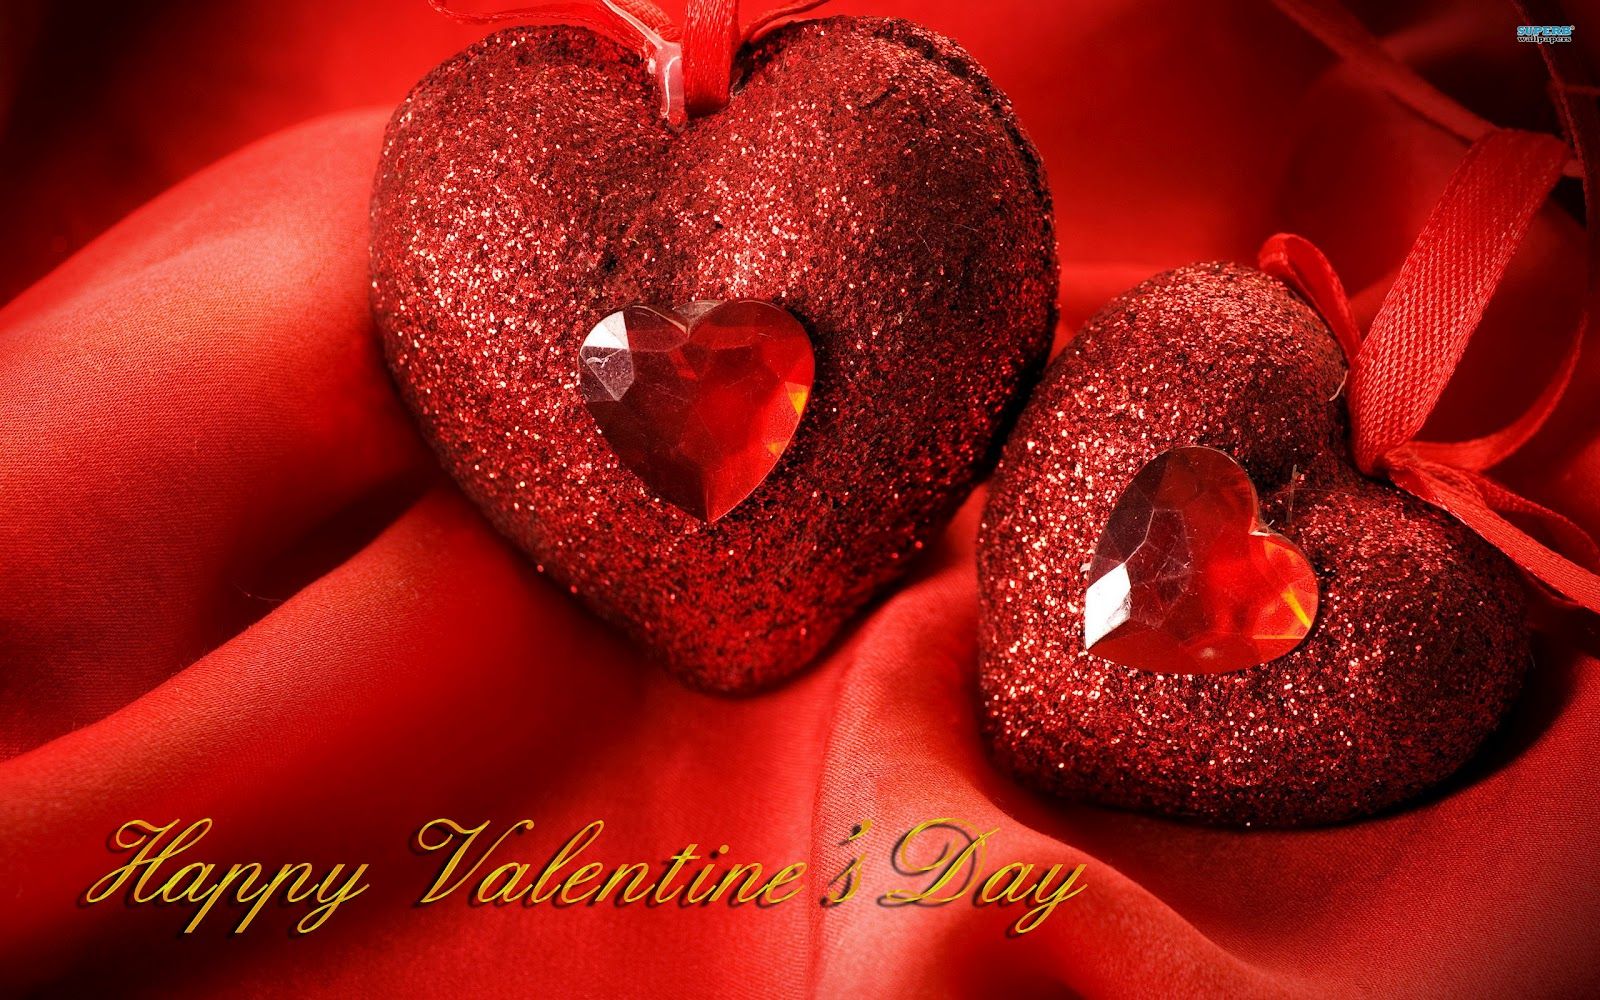 Happy Valentines Day Backgrounds - Wallpaper Cave